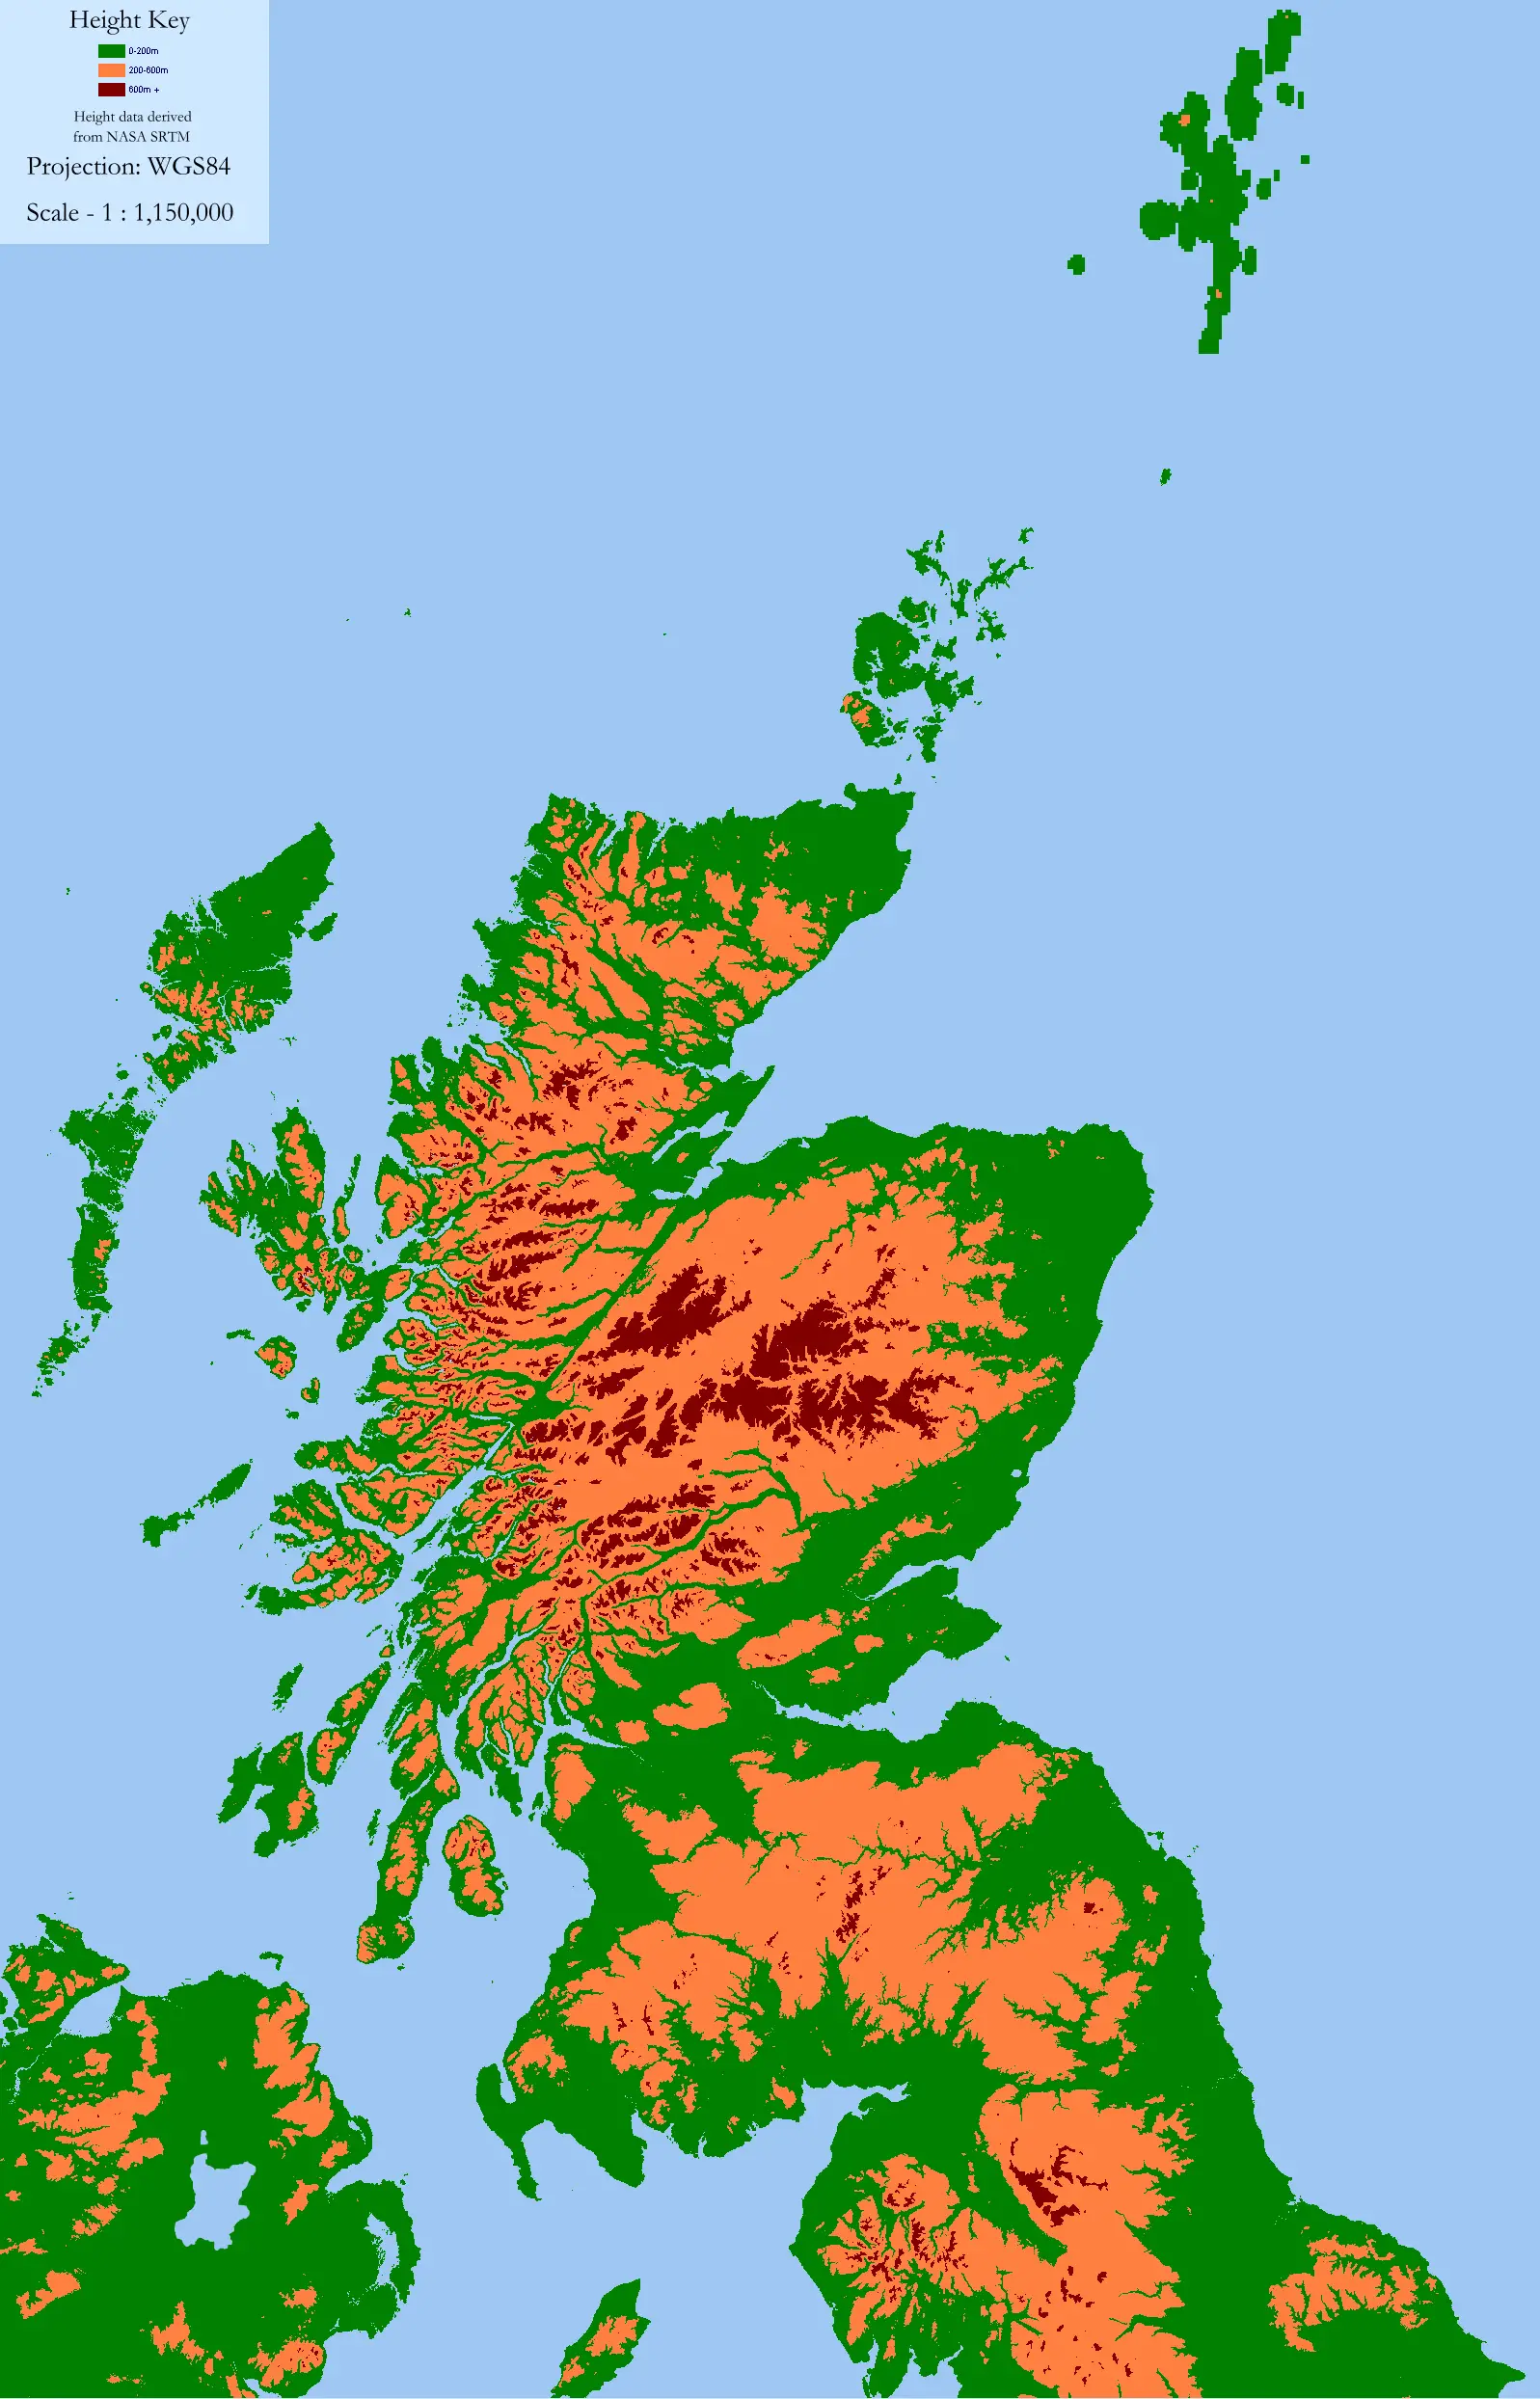 Scotland Land Use By Height